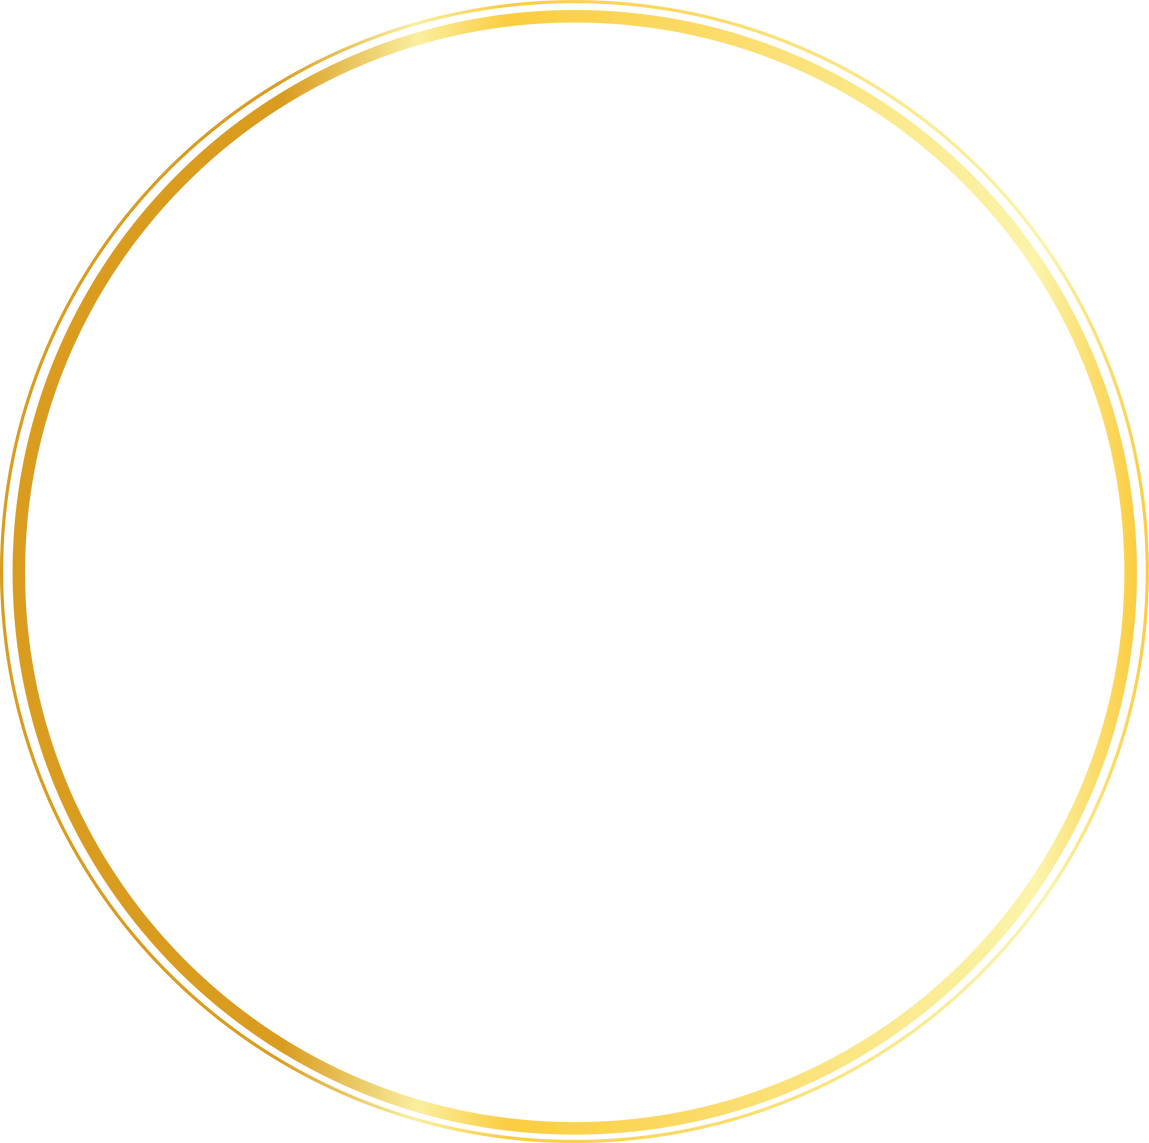 Circle round Aesthetic gold shape abstract frame border background element